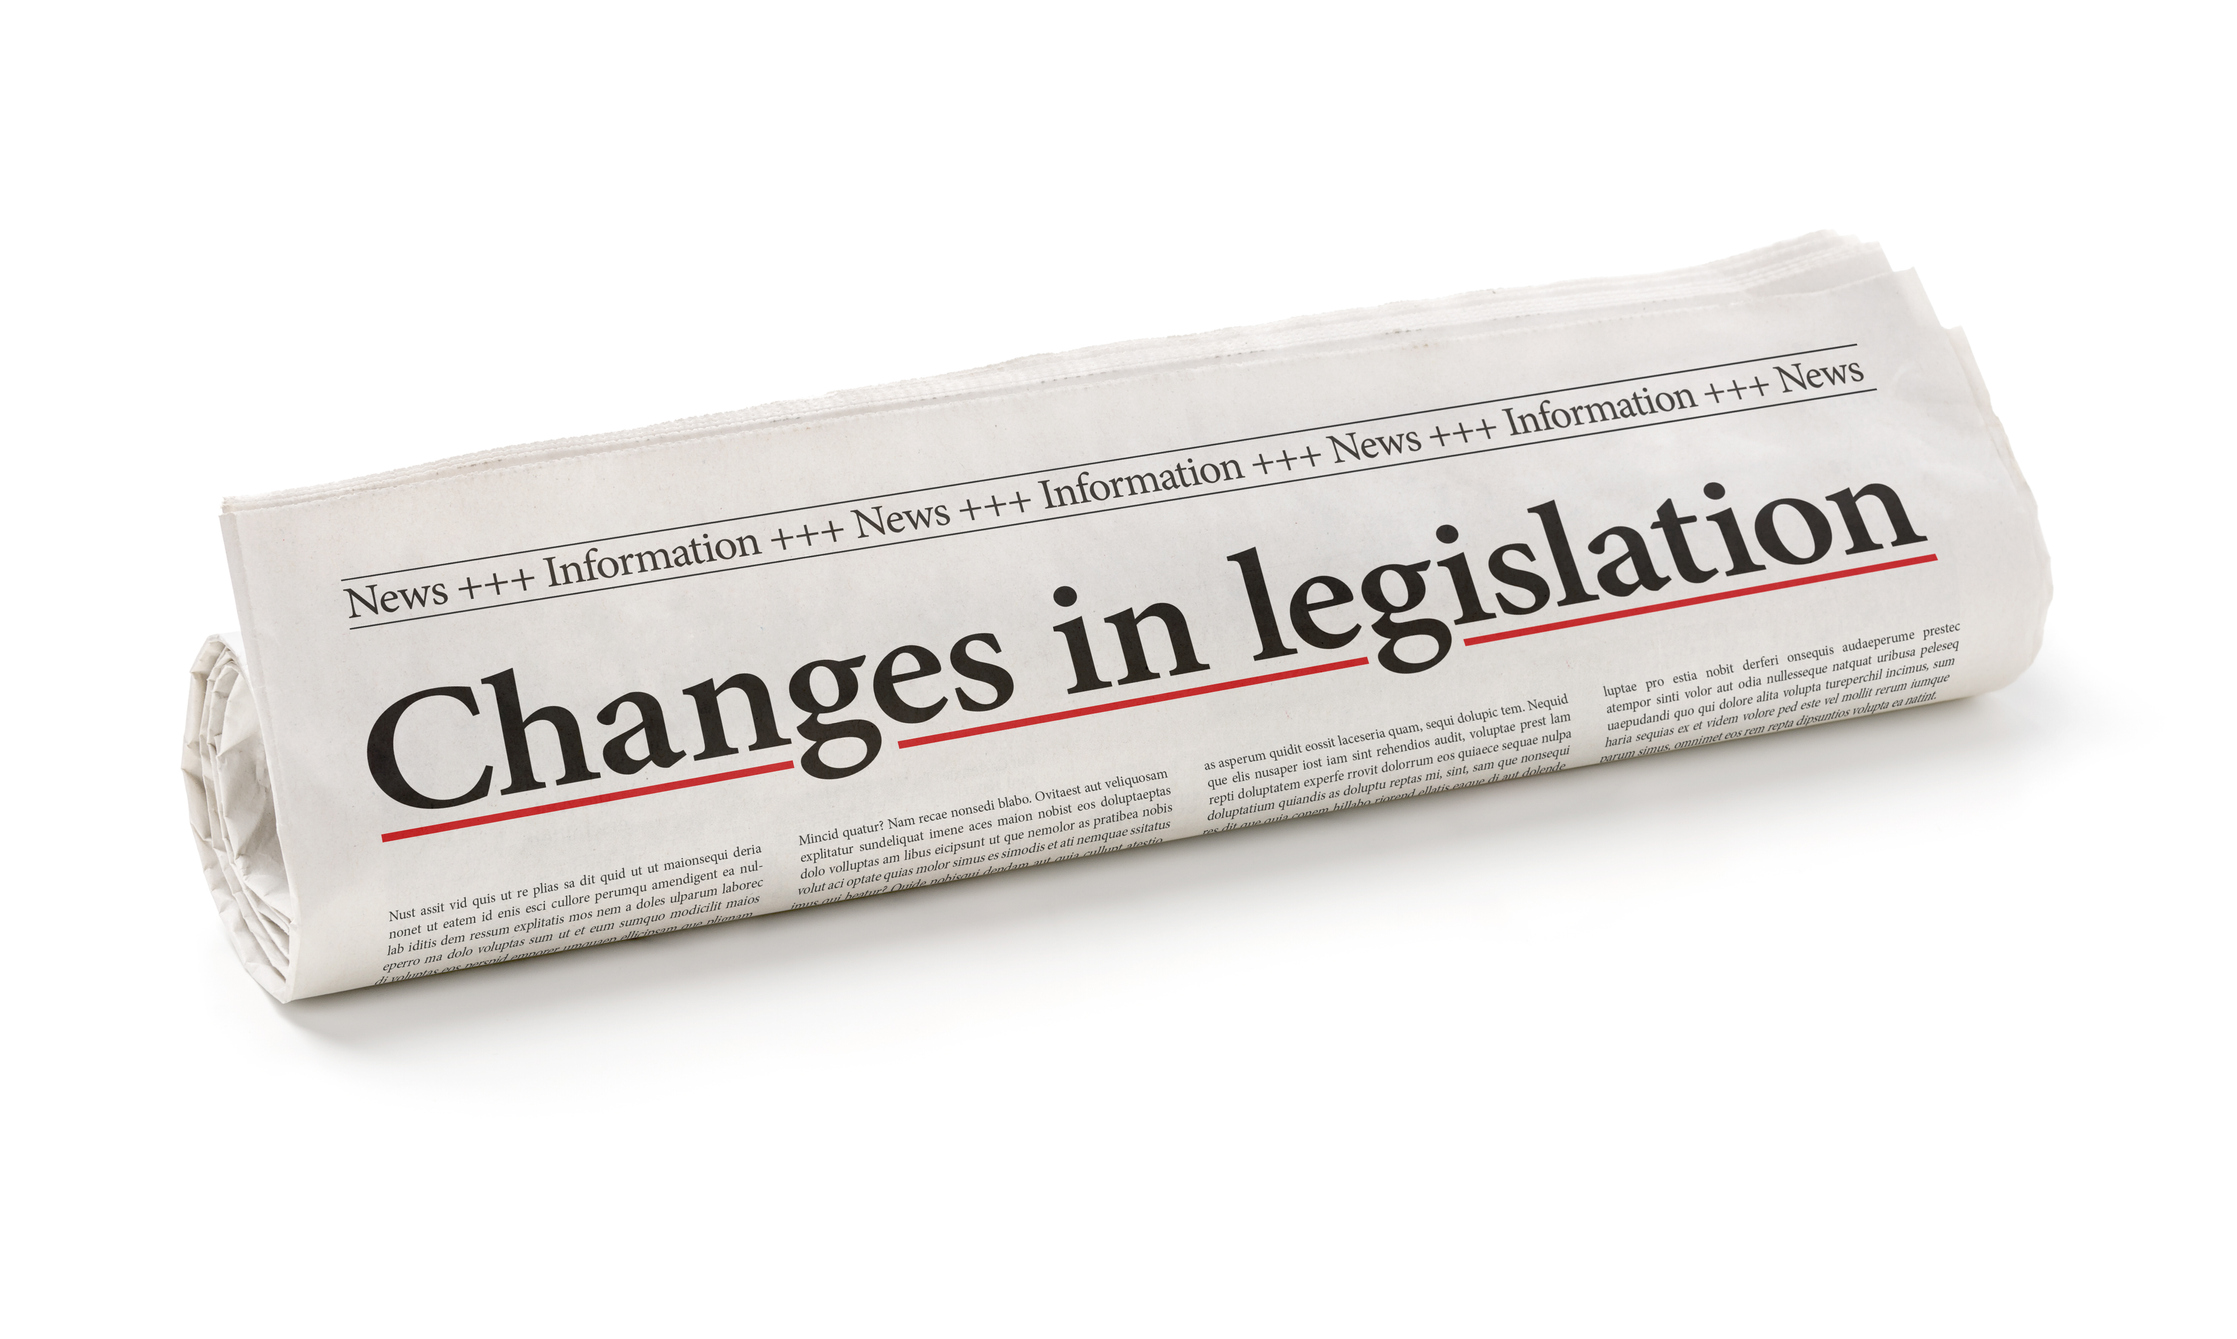 Changes in legislation printed on a rolled newspaper